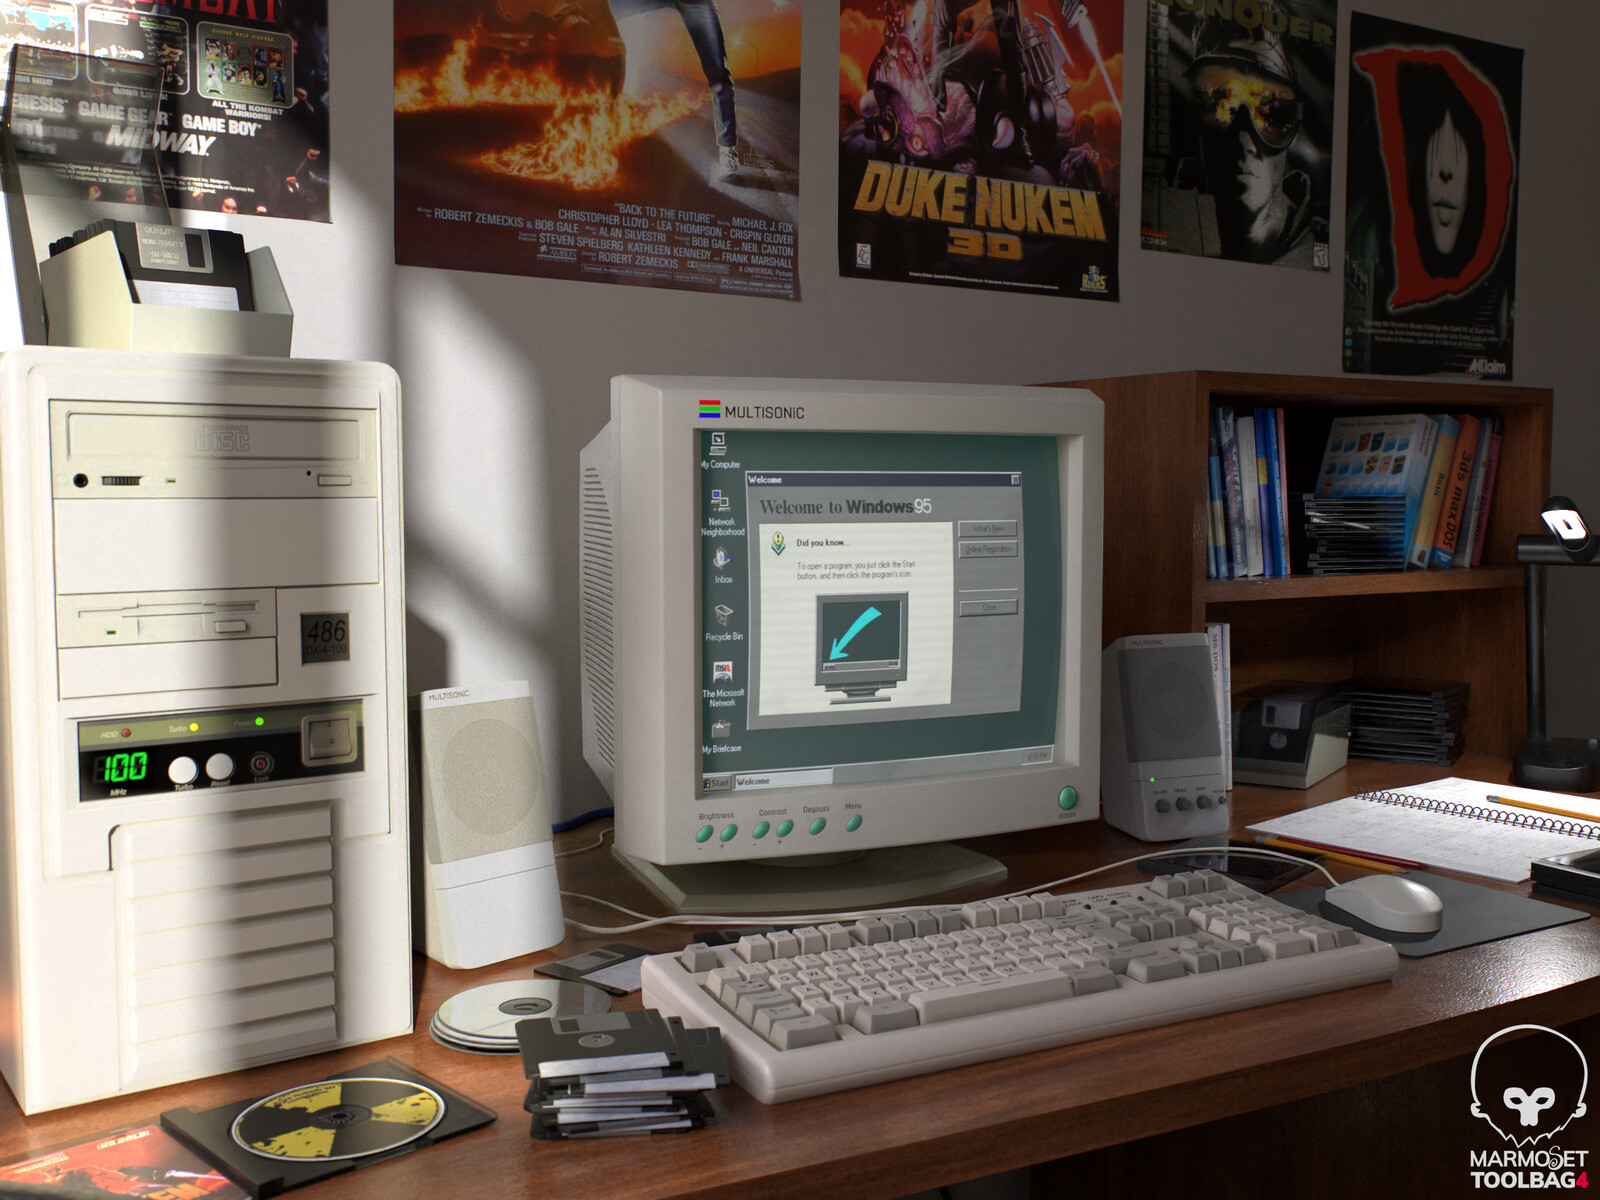 A scene from 90s (Marmoset Toolbag 4)